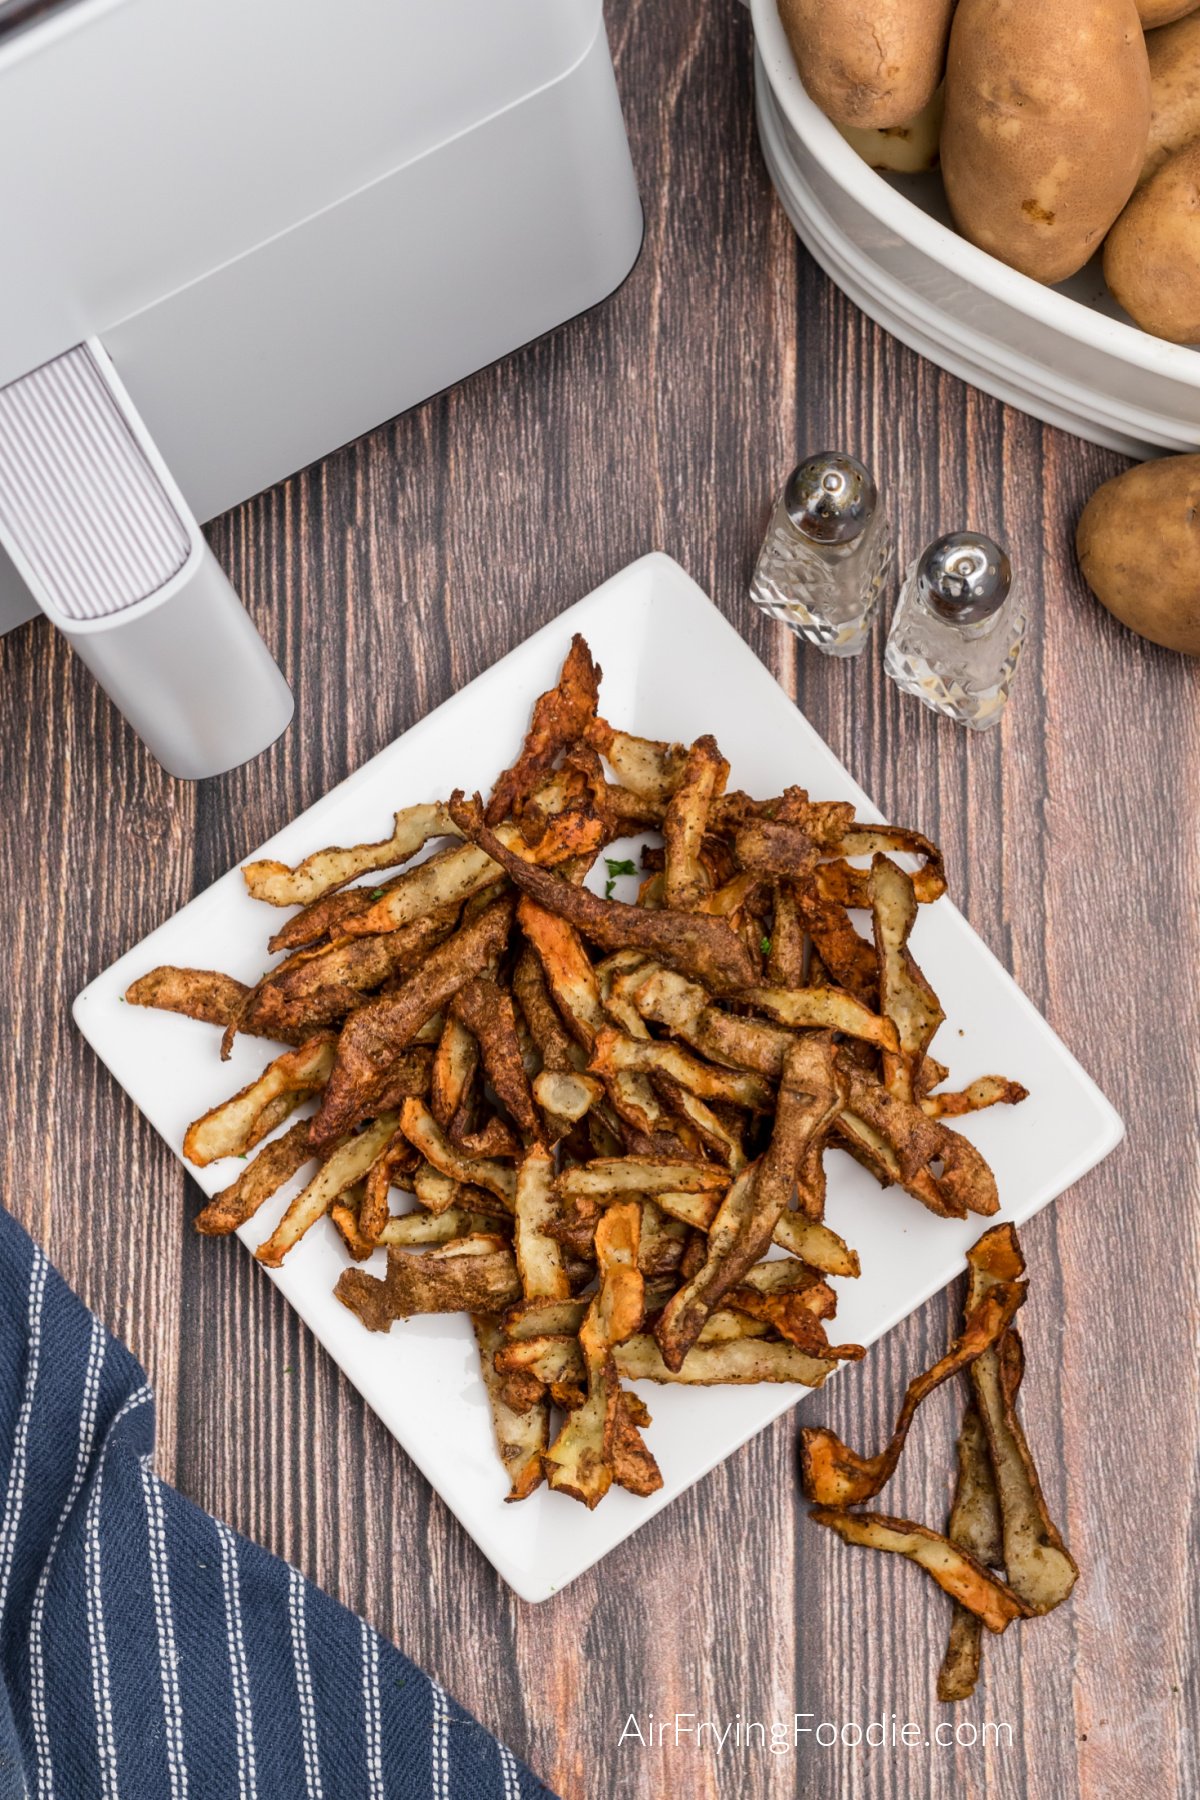 Overhead photo of seasoned potato peelings made in the air fryer and served on a white plate.